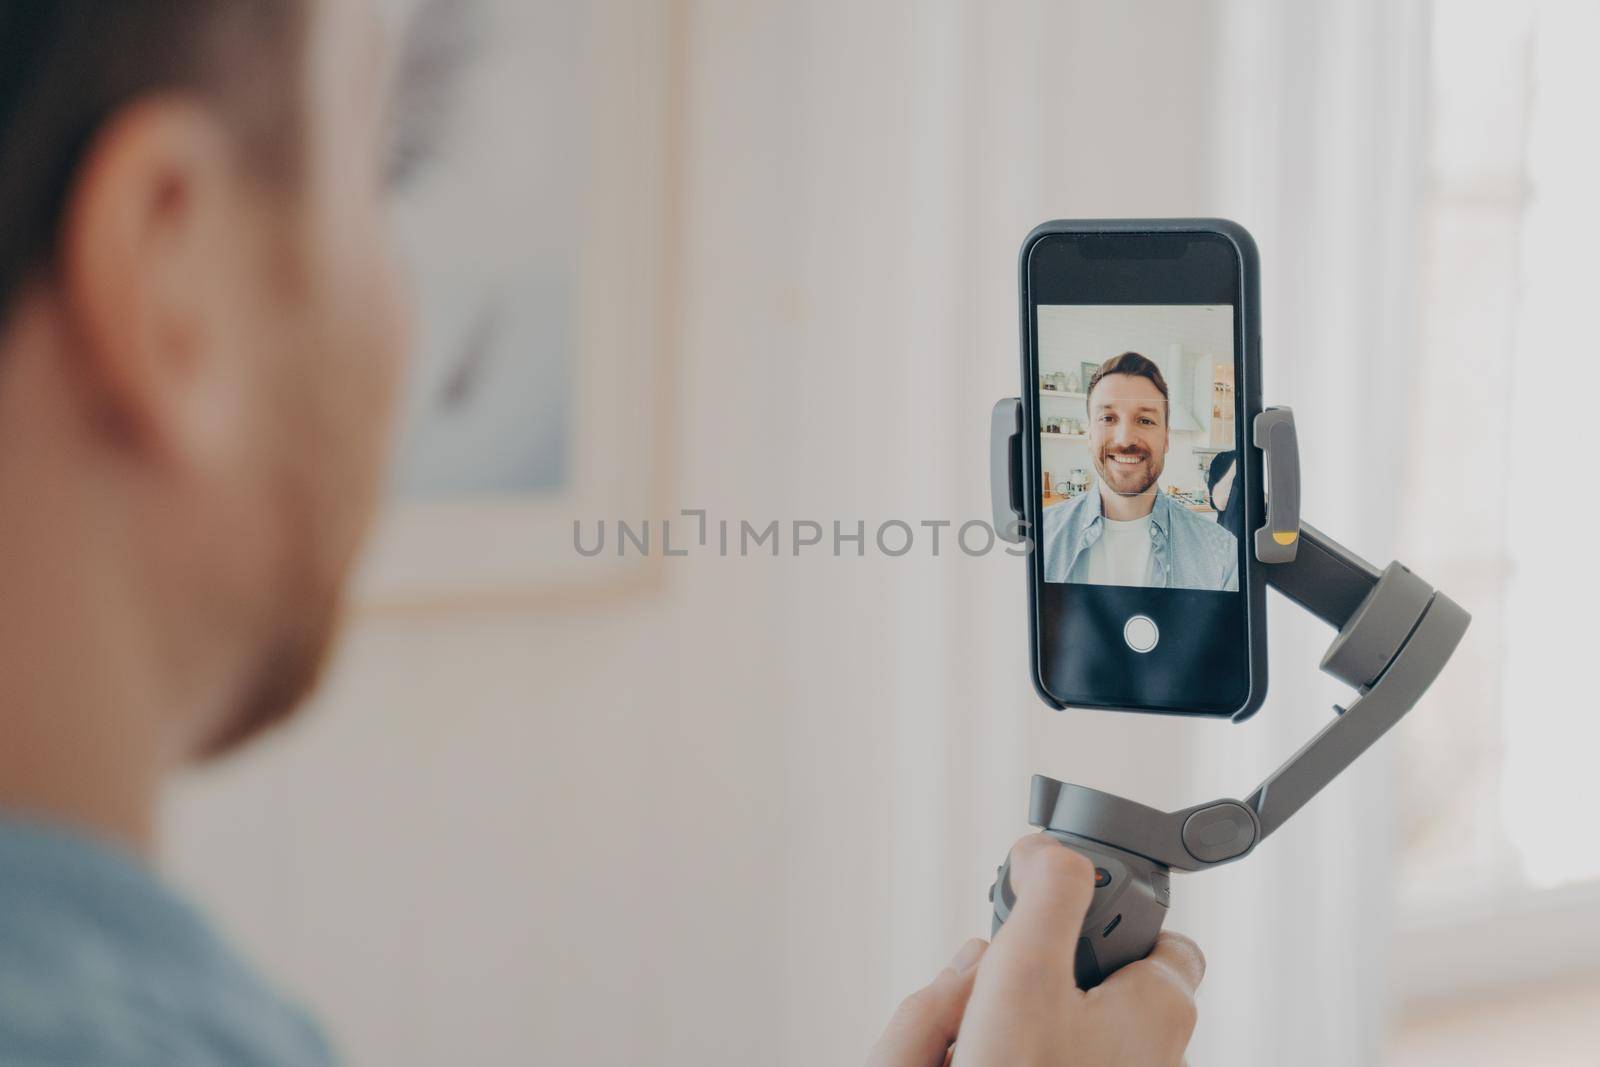 Handsome young man vlogging or recording video on smartphone with great handheld gimbal stabilizer, standing in living room at home background. Vlog and video blogging concept